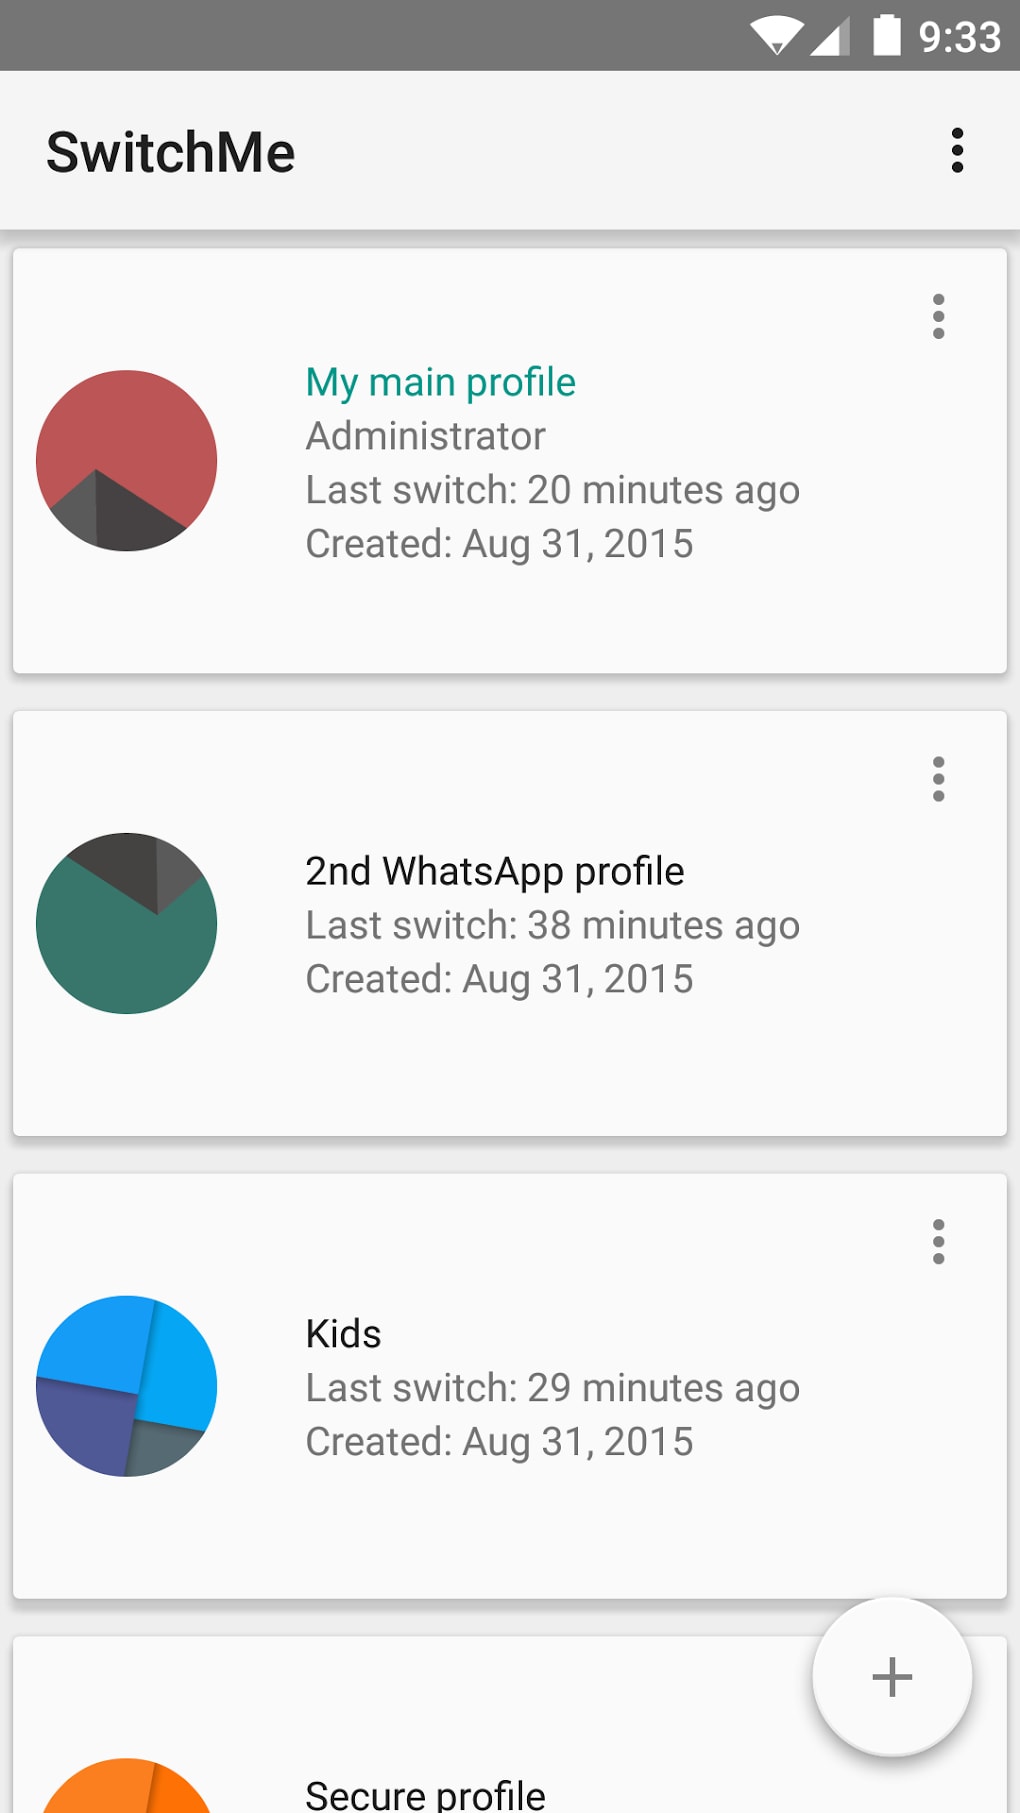 SwitchMe Multiple Accounts APK for Android - Download